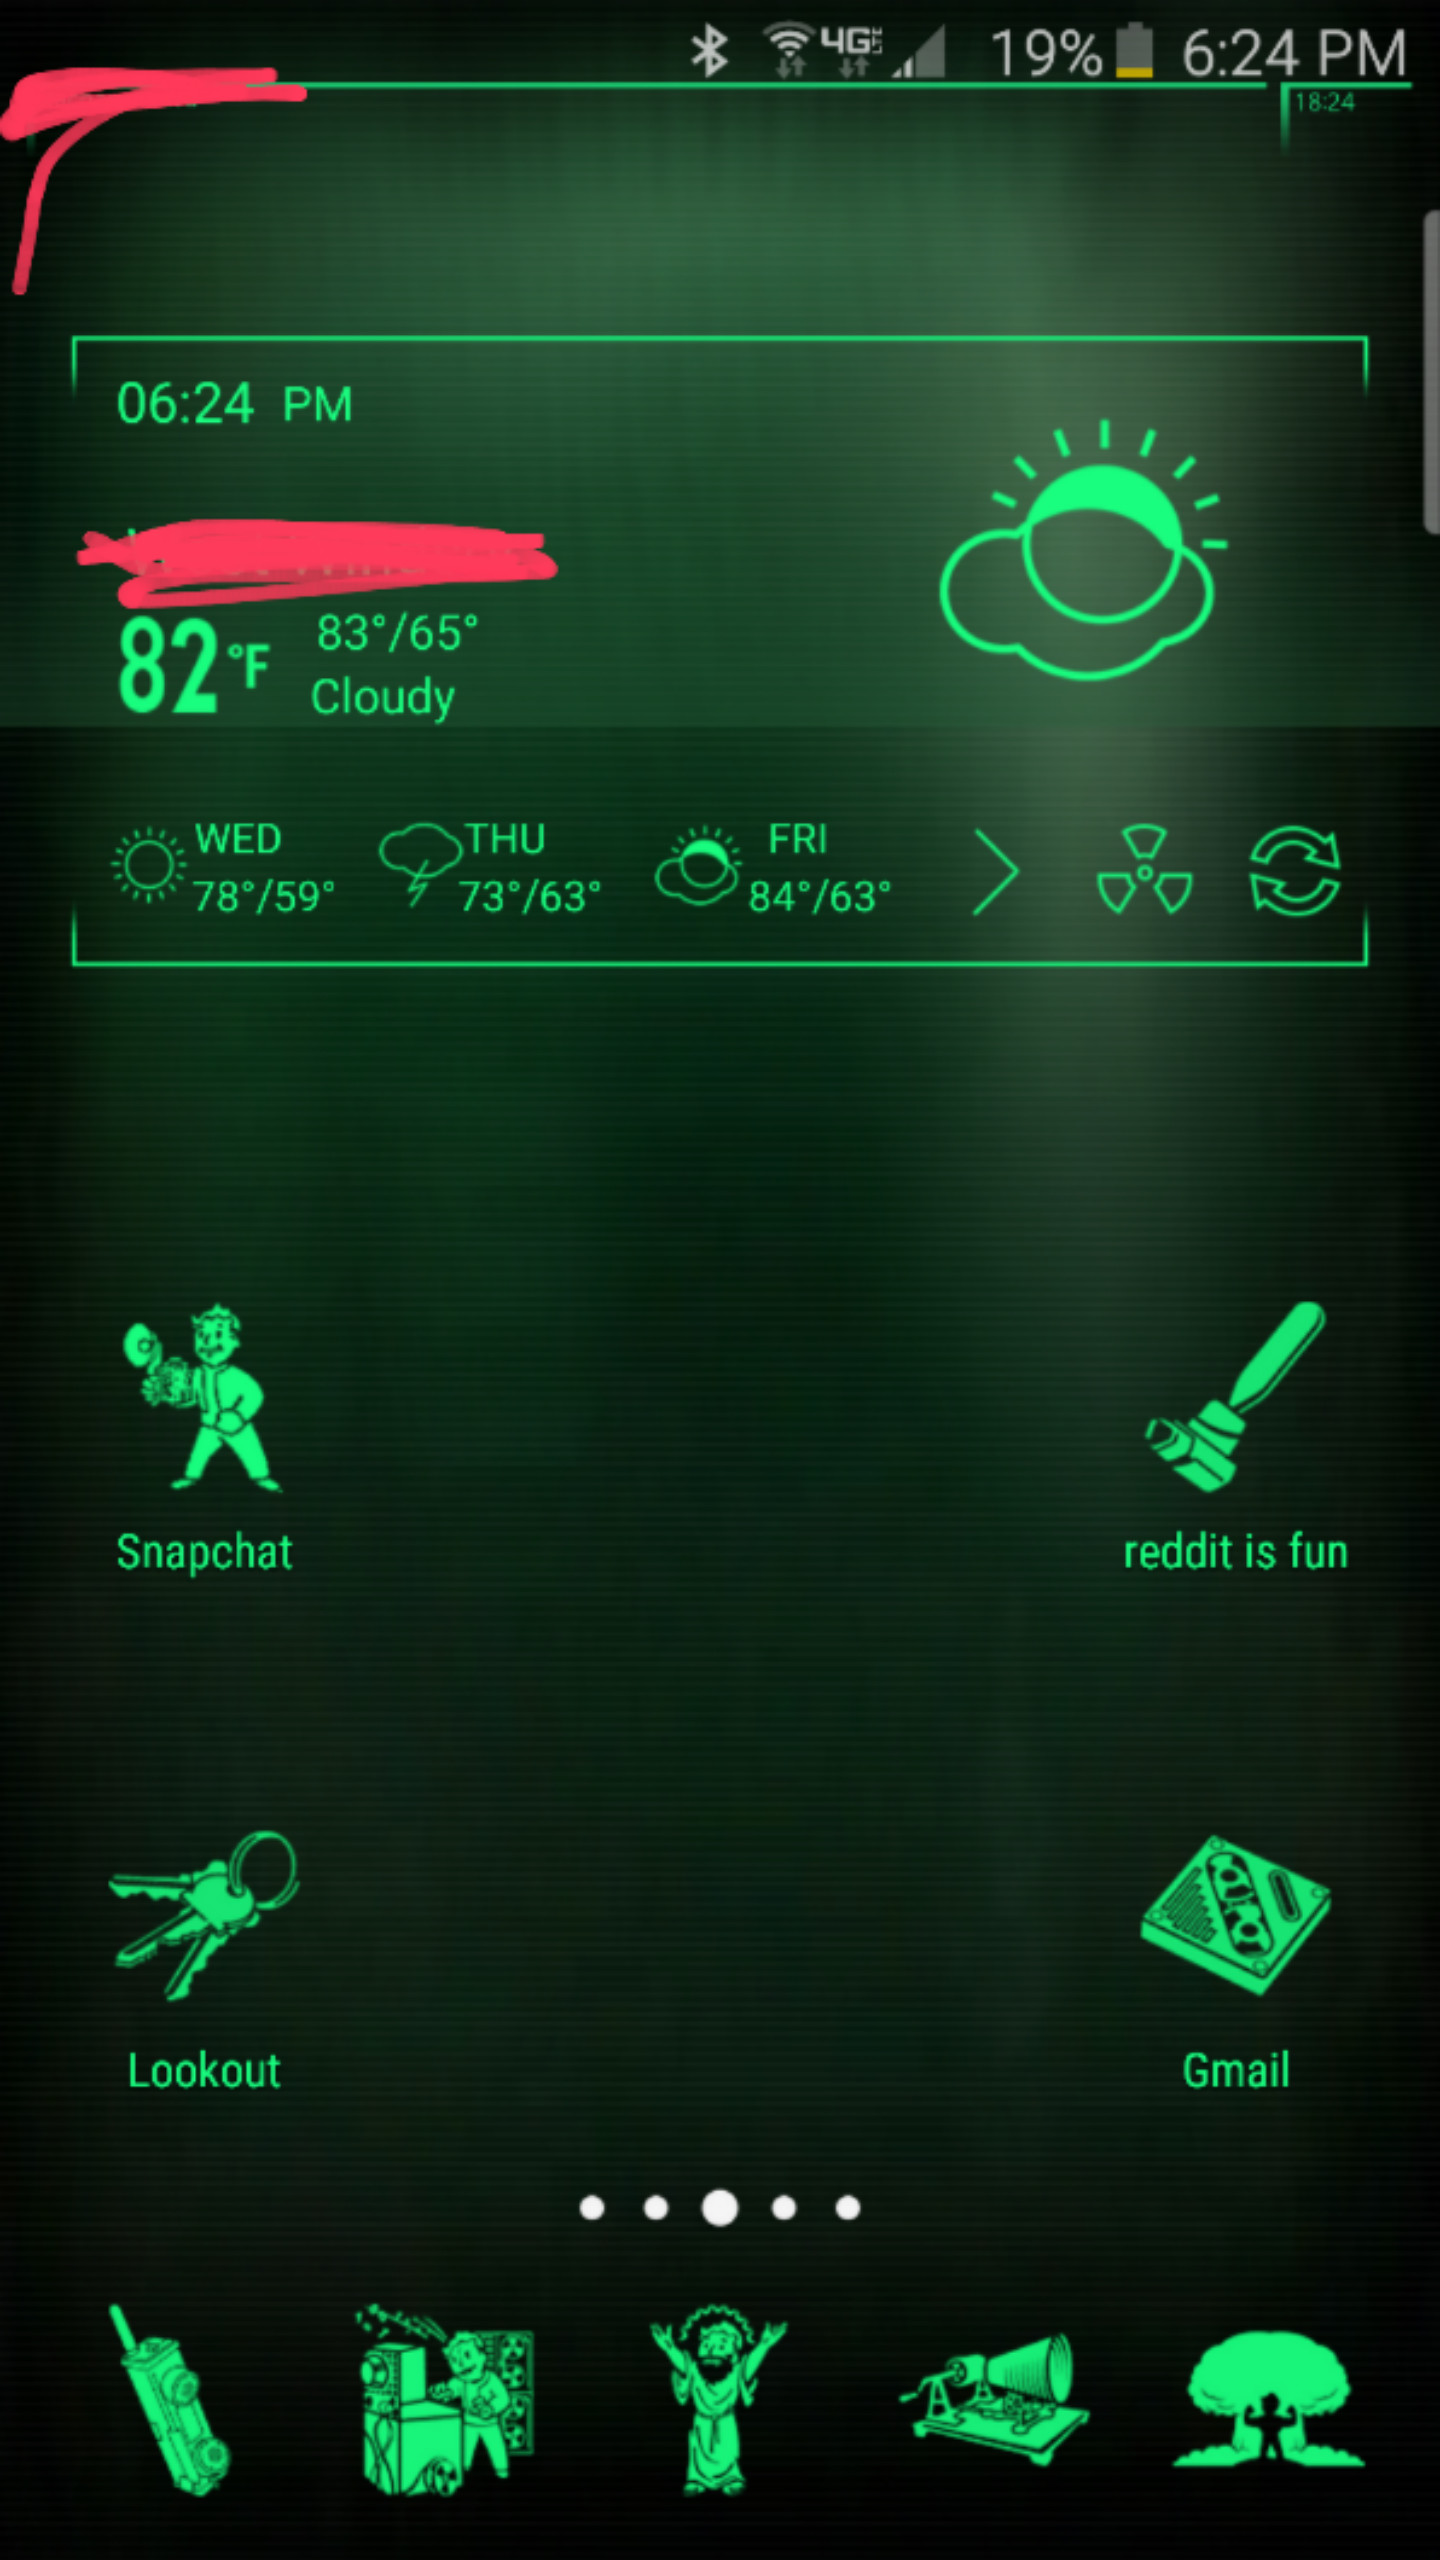 1440x2560 From one android user to another, screw fallout shelter! Just turn your  phone onto